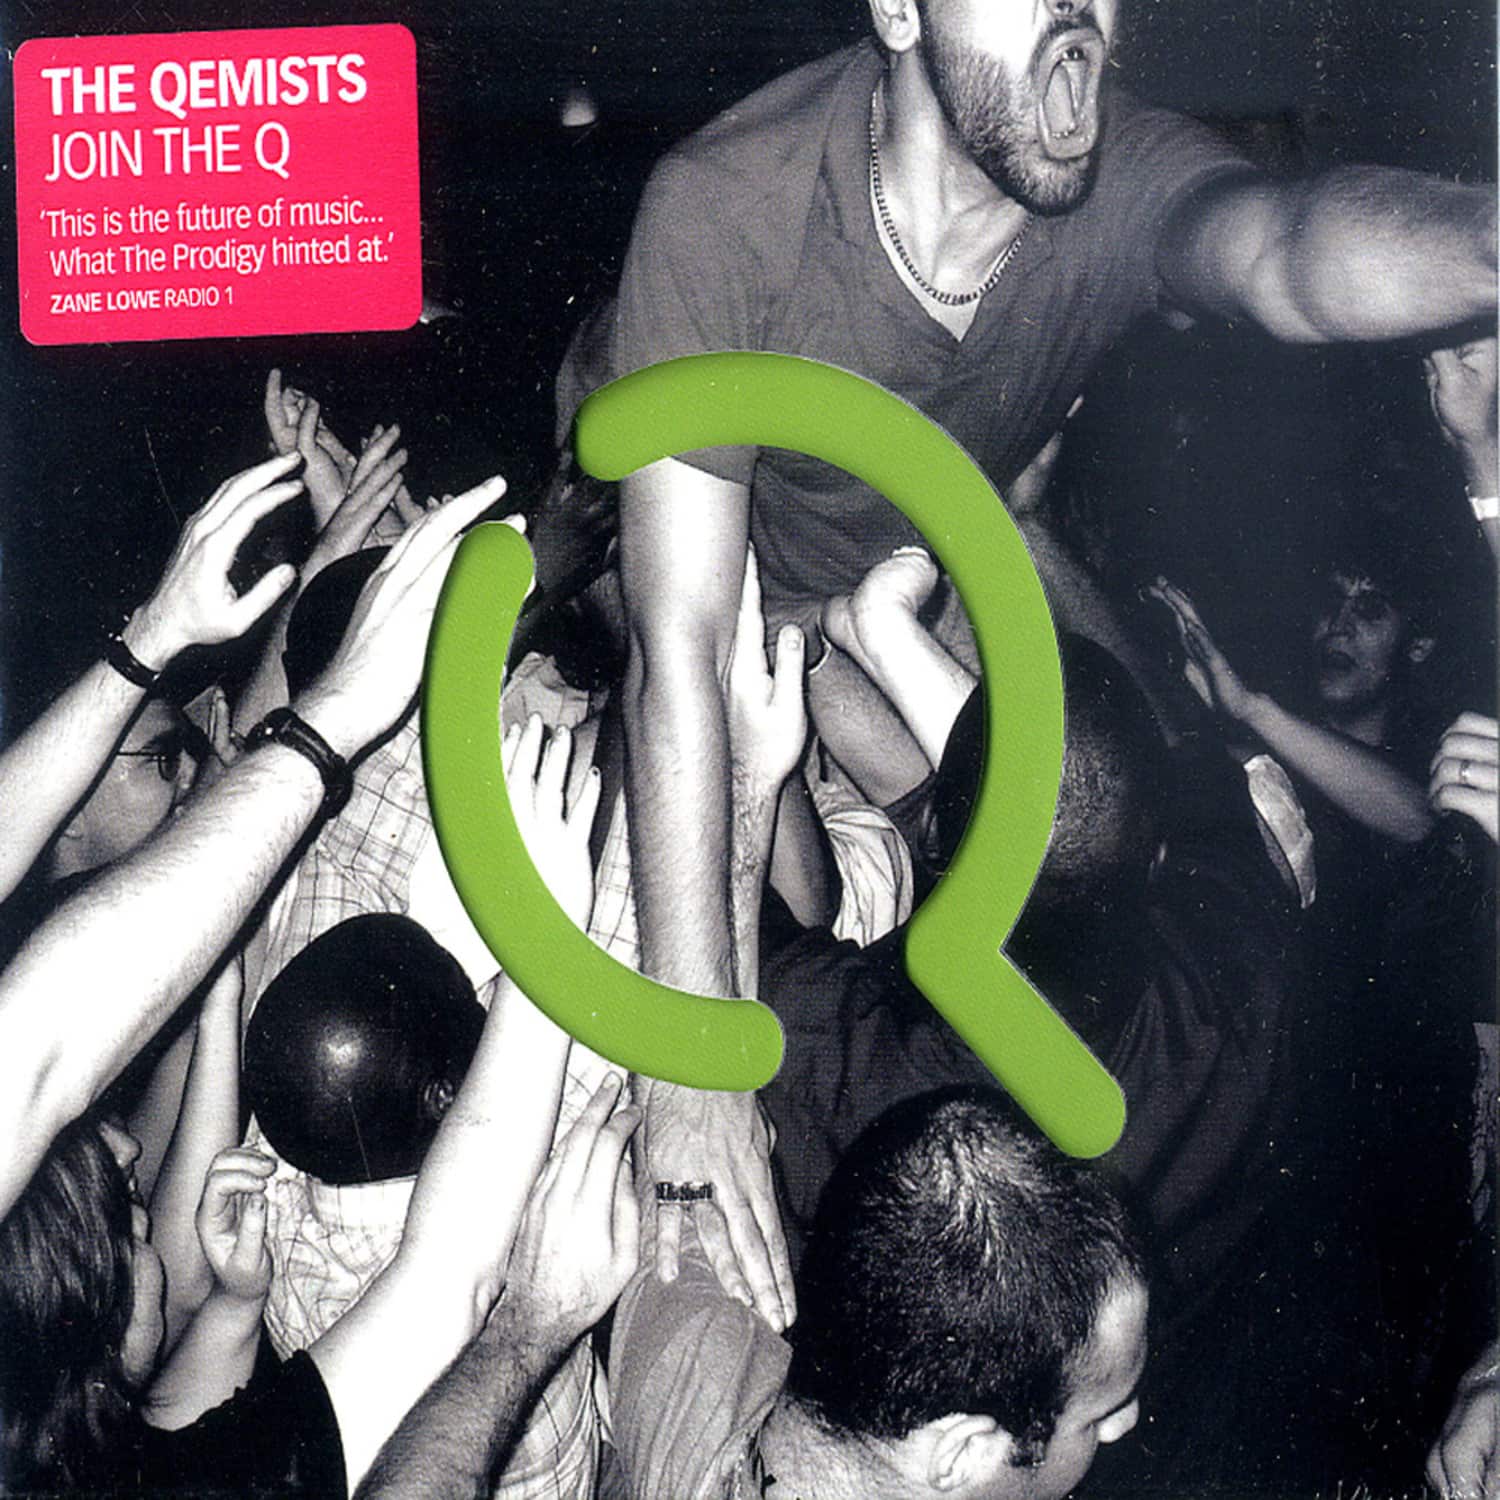 The Quemists - JOIN THE Q 